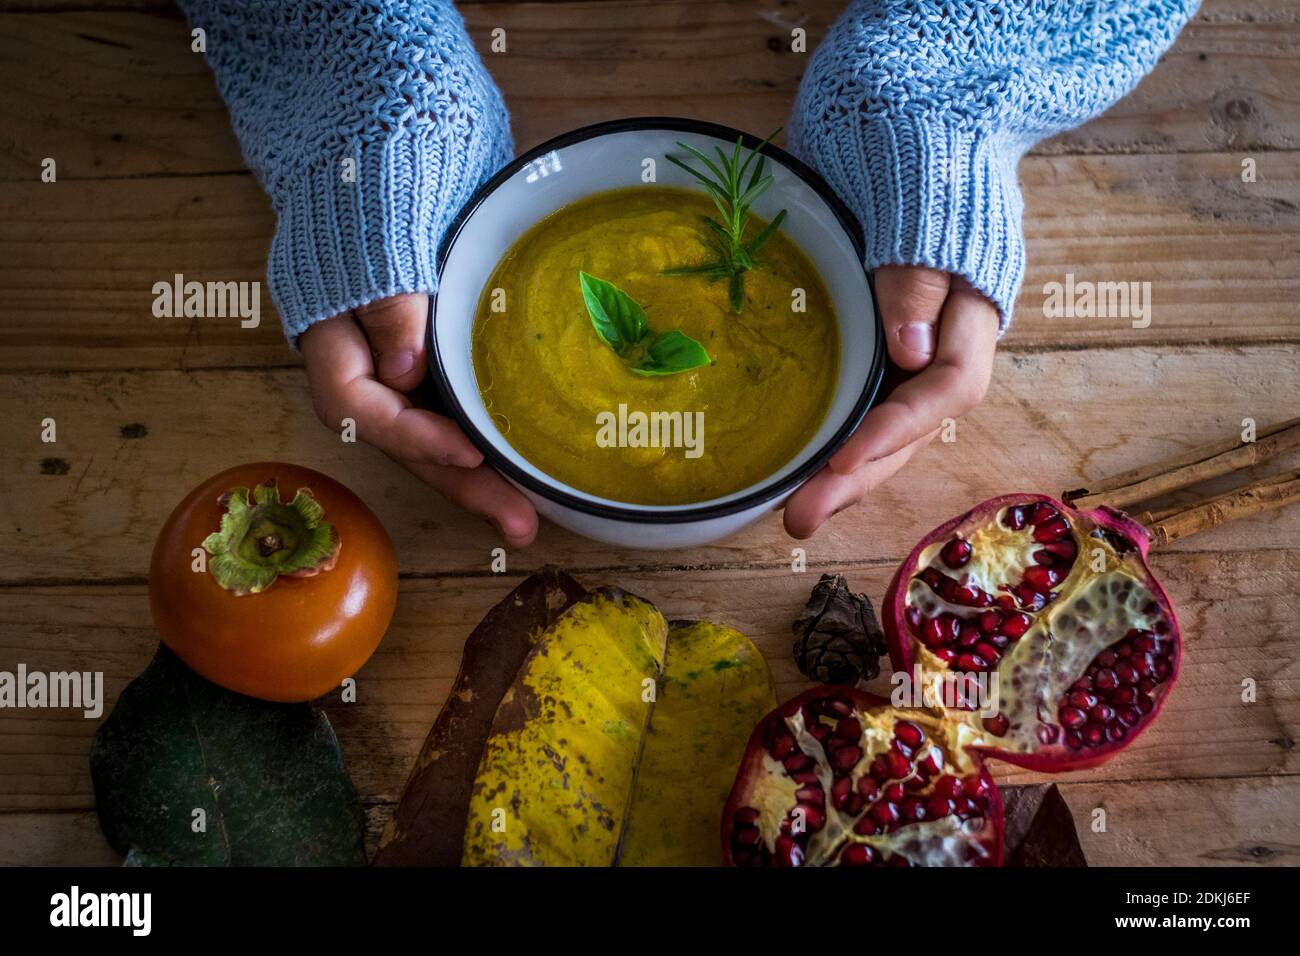 https://c8.alamy.com/comp/2DKJ6EF/view-of-vegetable-soup-in-autumn-colors-with-hands-holding-dish-with-vegetarian-fresh-food-ready-to-eat-and-stay-healthy-wooden-table-and-health-lifestyle-concept-people-2DKJ6EF.jpg